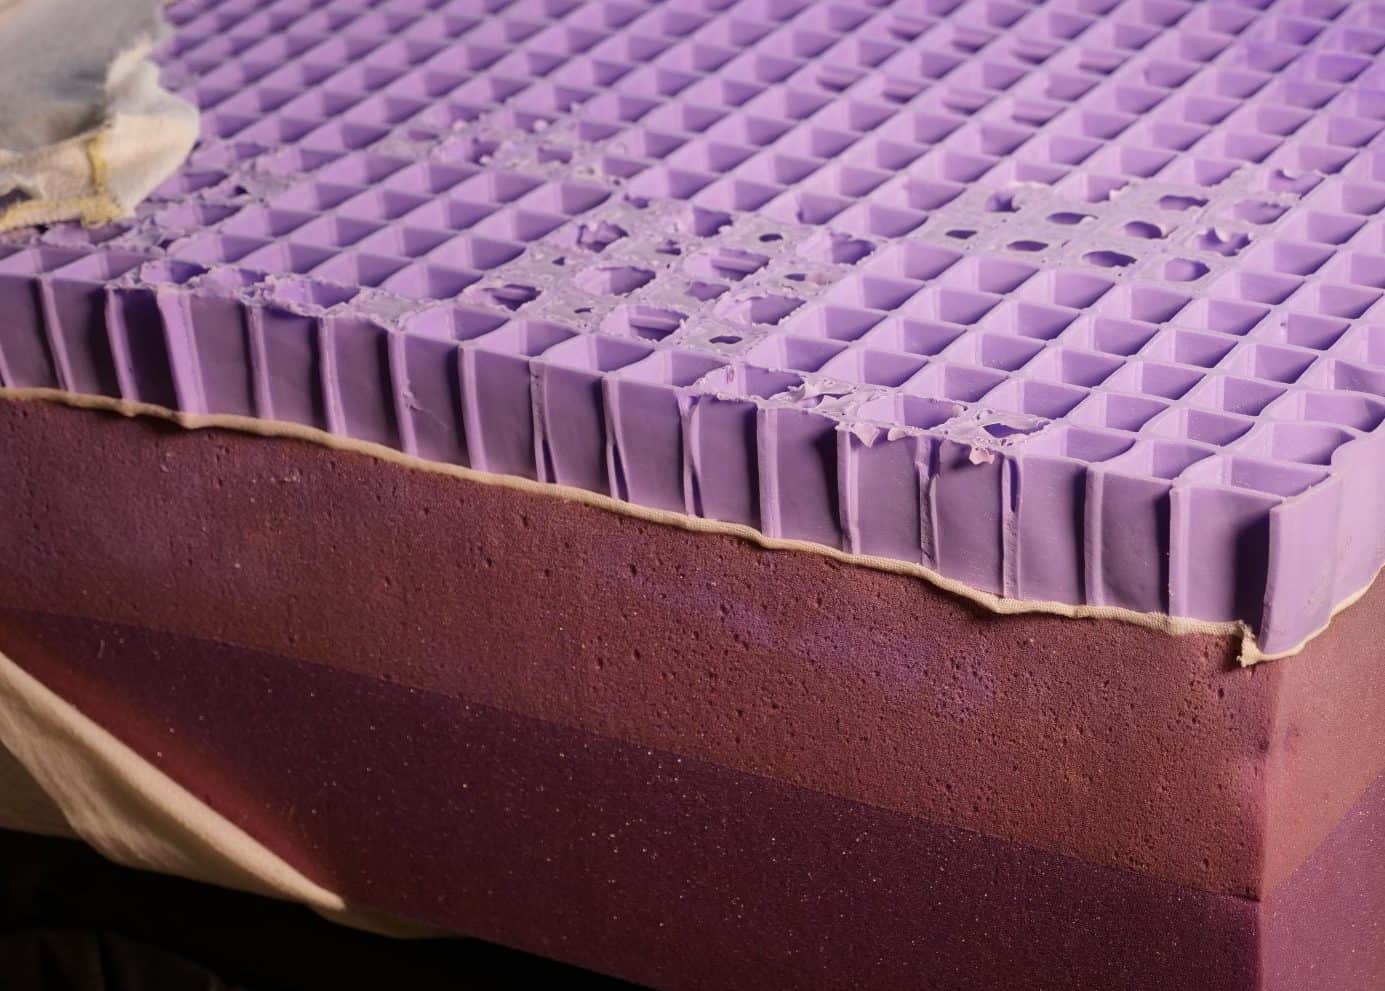 is the a mattress similar to purple